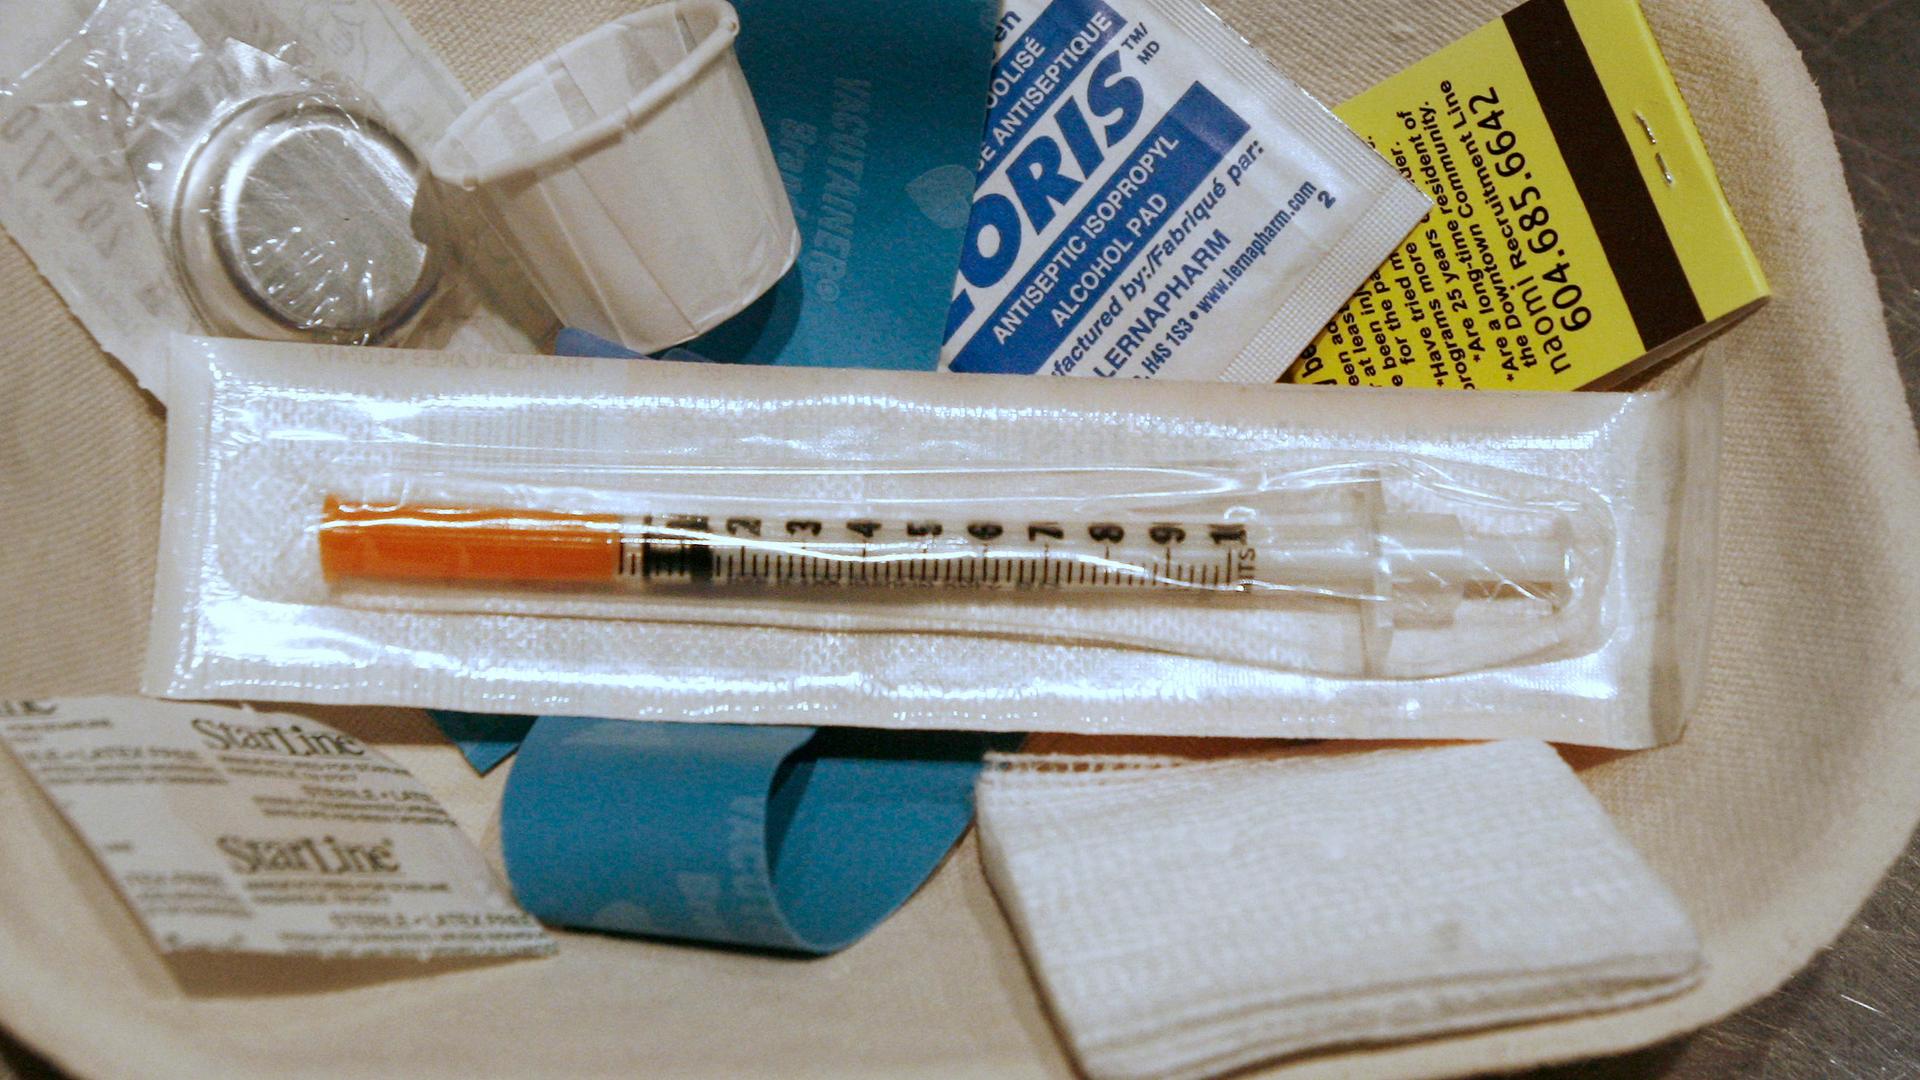 A small kit of supplies containing syringes, bandaids and antiseptic pads waits to be used by a drug addict inside a safe injection site on Vancouver, British Columbia's eastside August 23, 2006. Nearly a decade later, the city will be offering free heroi